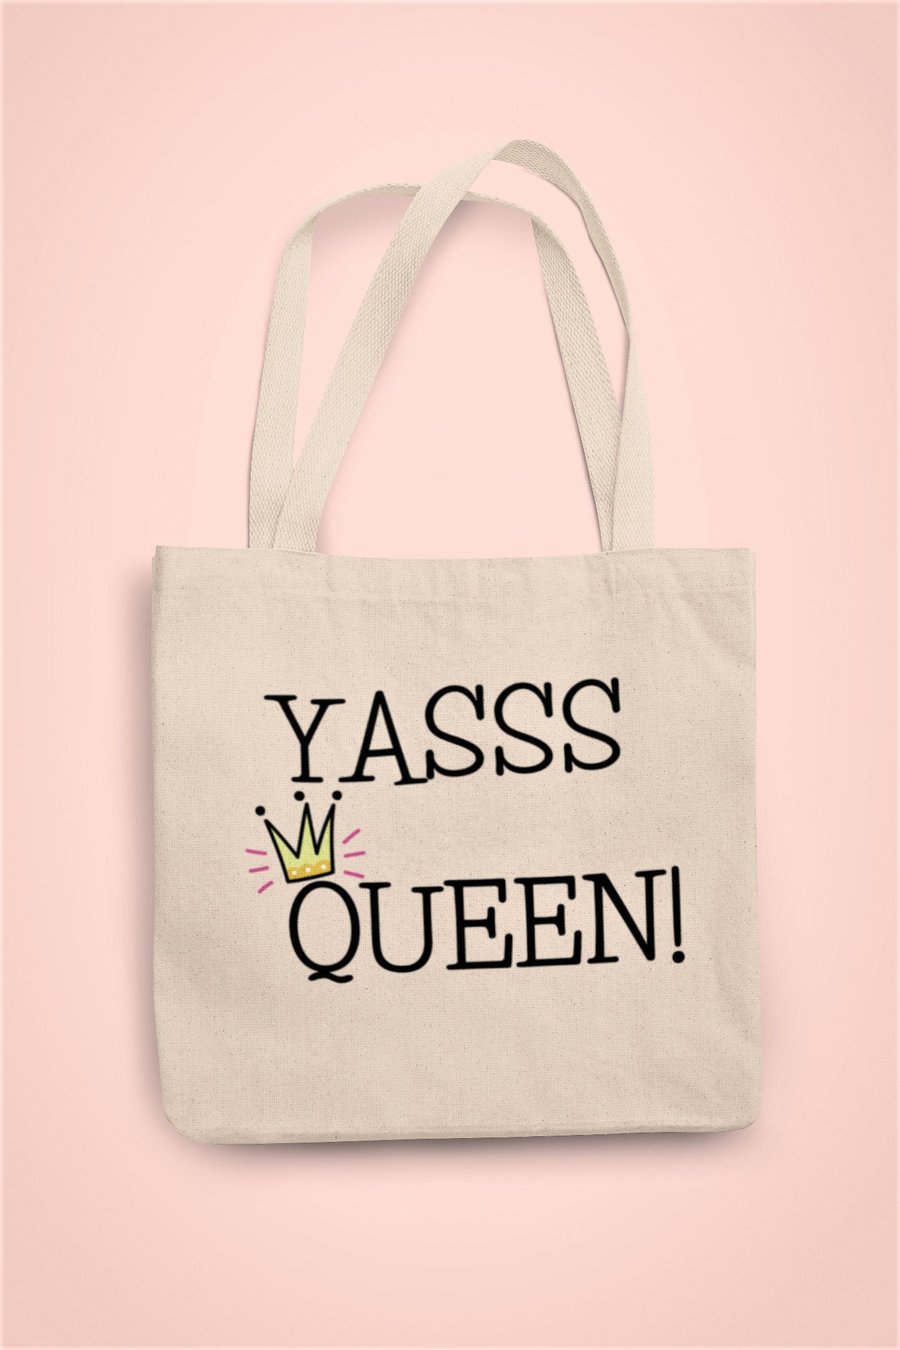 Yasss Queen Tote Bag Sassy Gay Reusable Cotton bag - Gift Present Best Friend